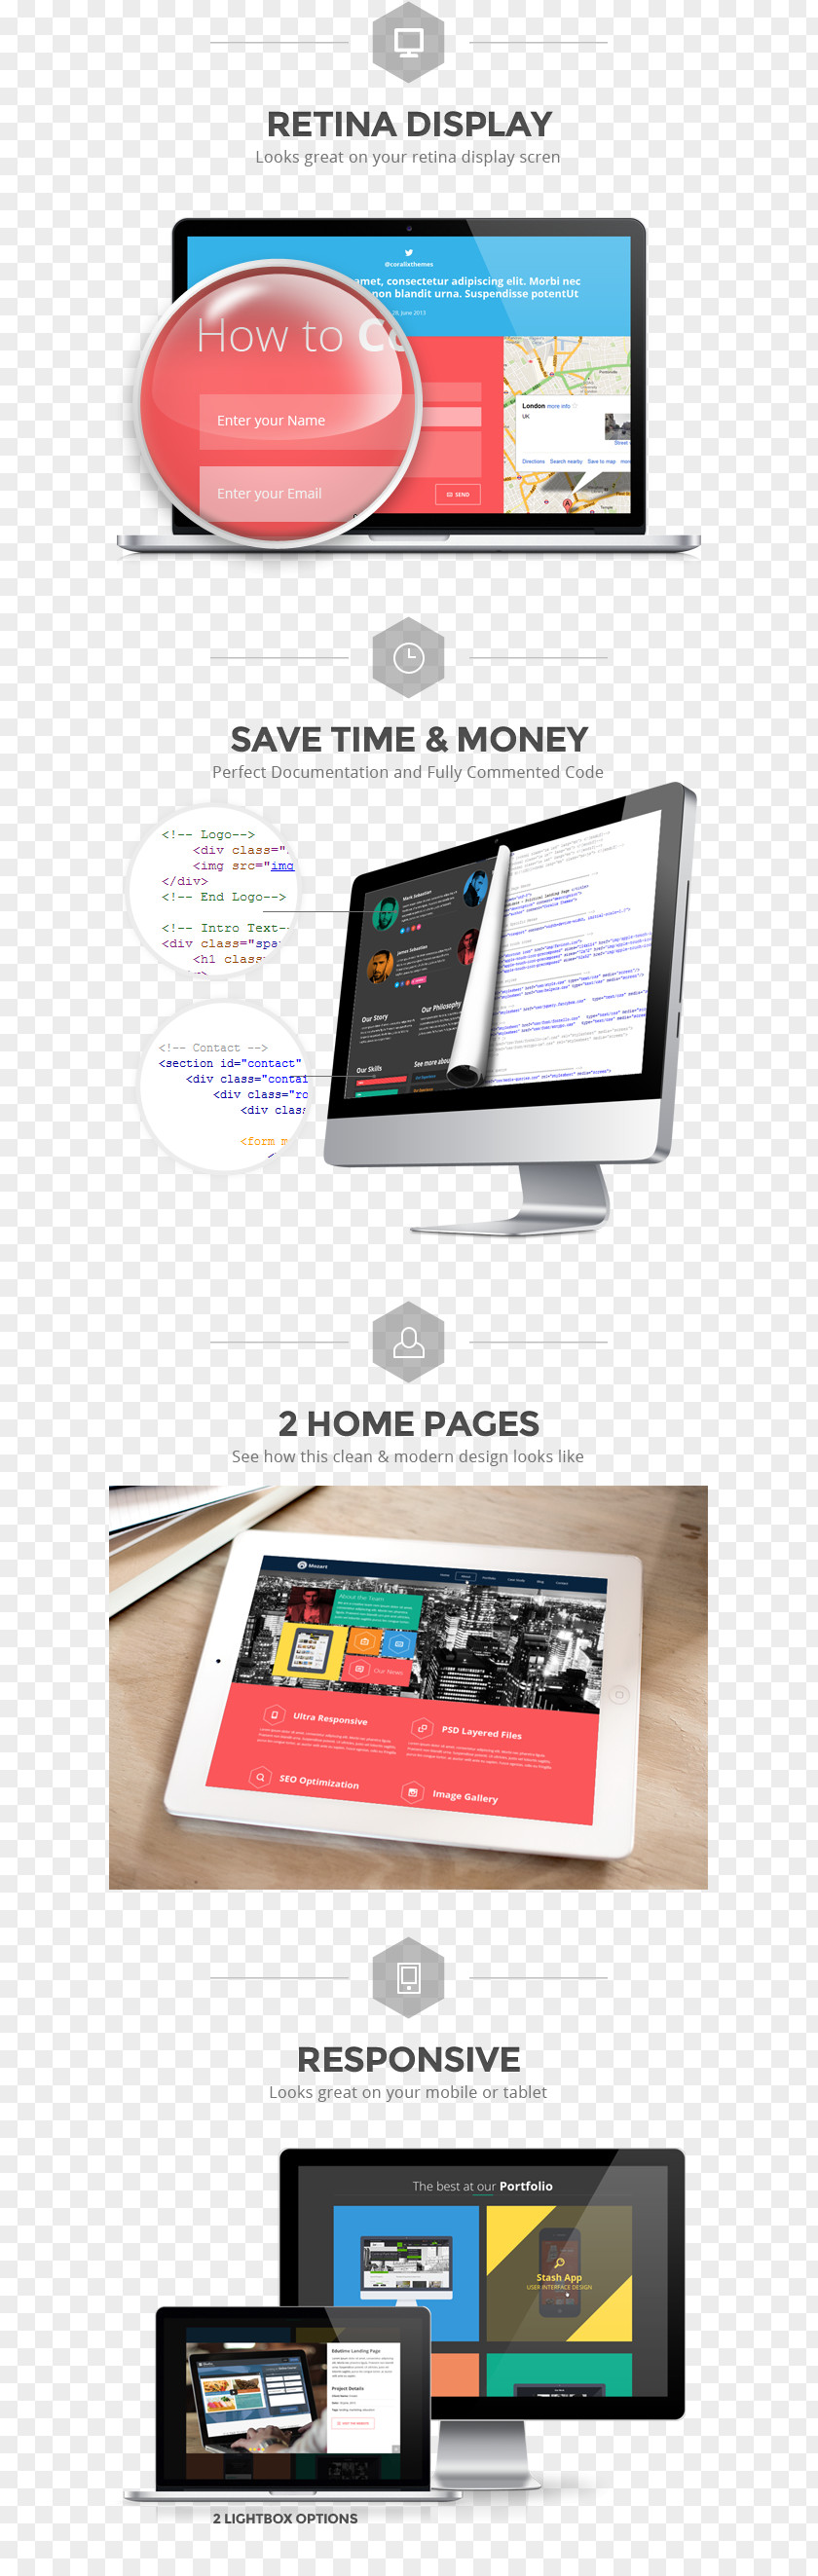 Design Responsive Web Page Flat Template PNG